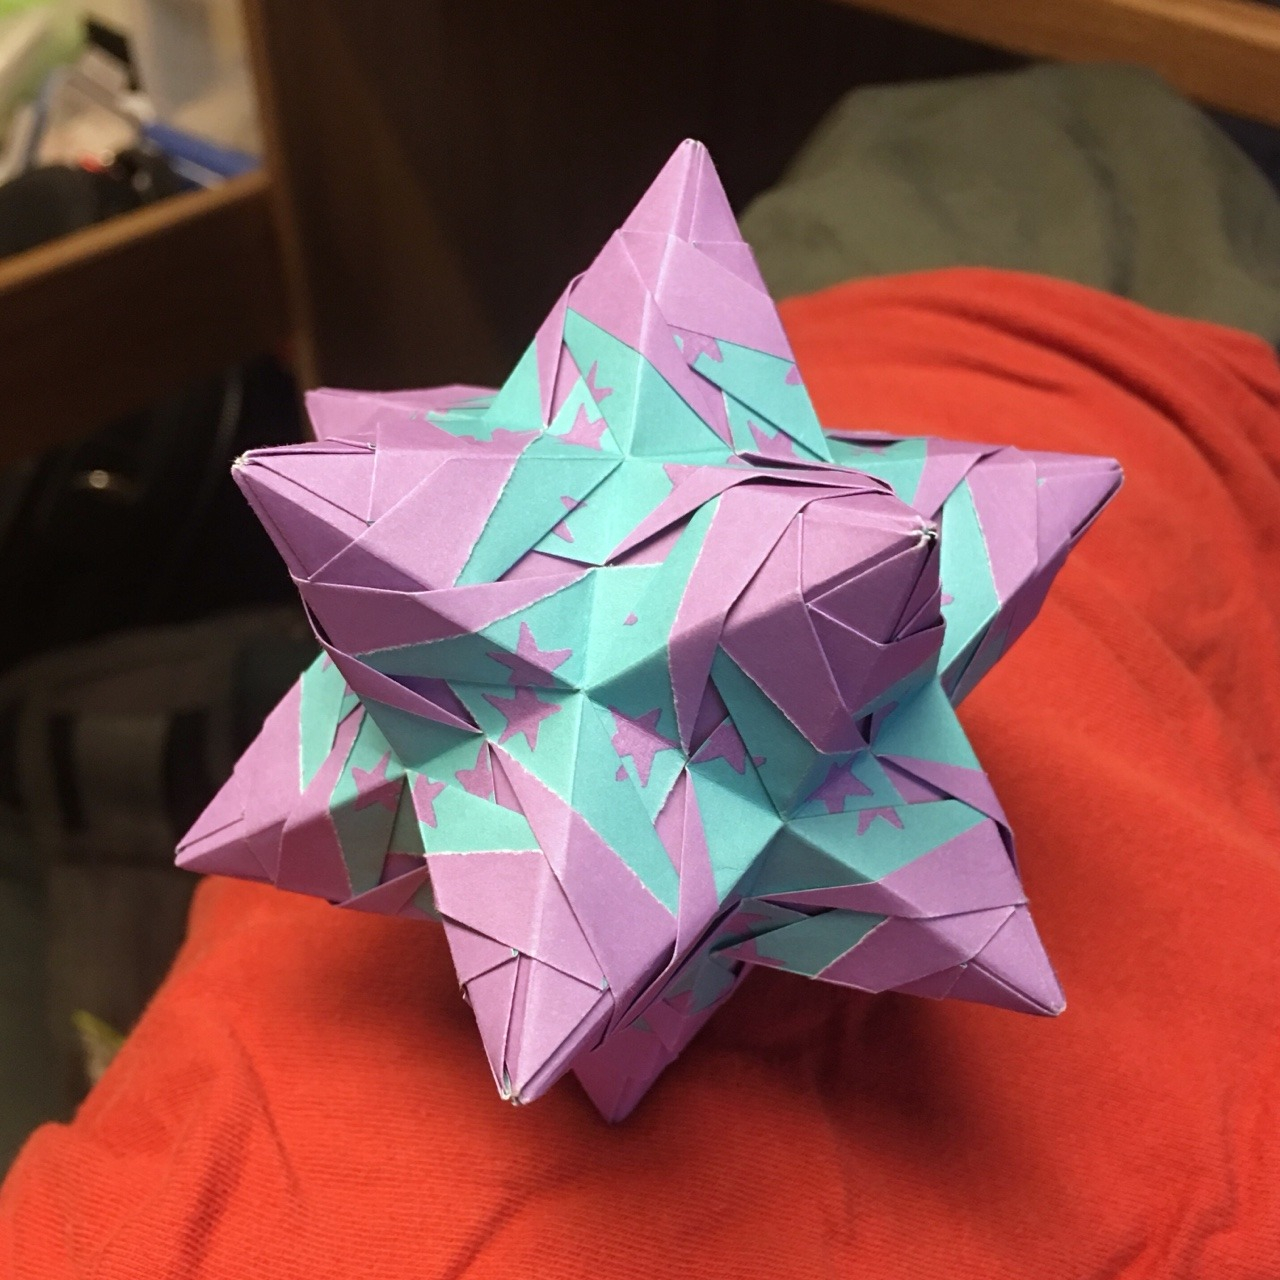 Tomoko Fuse Origami Instructions An Active Origami Blog In 2019 Rose Unit Tomoko Fuse 30